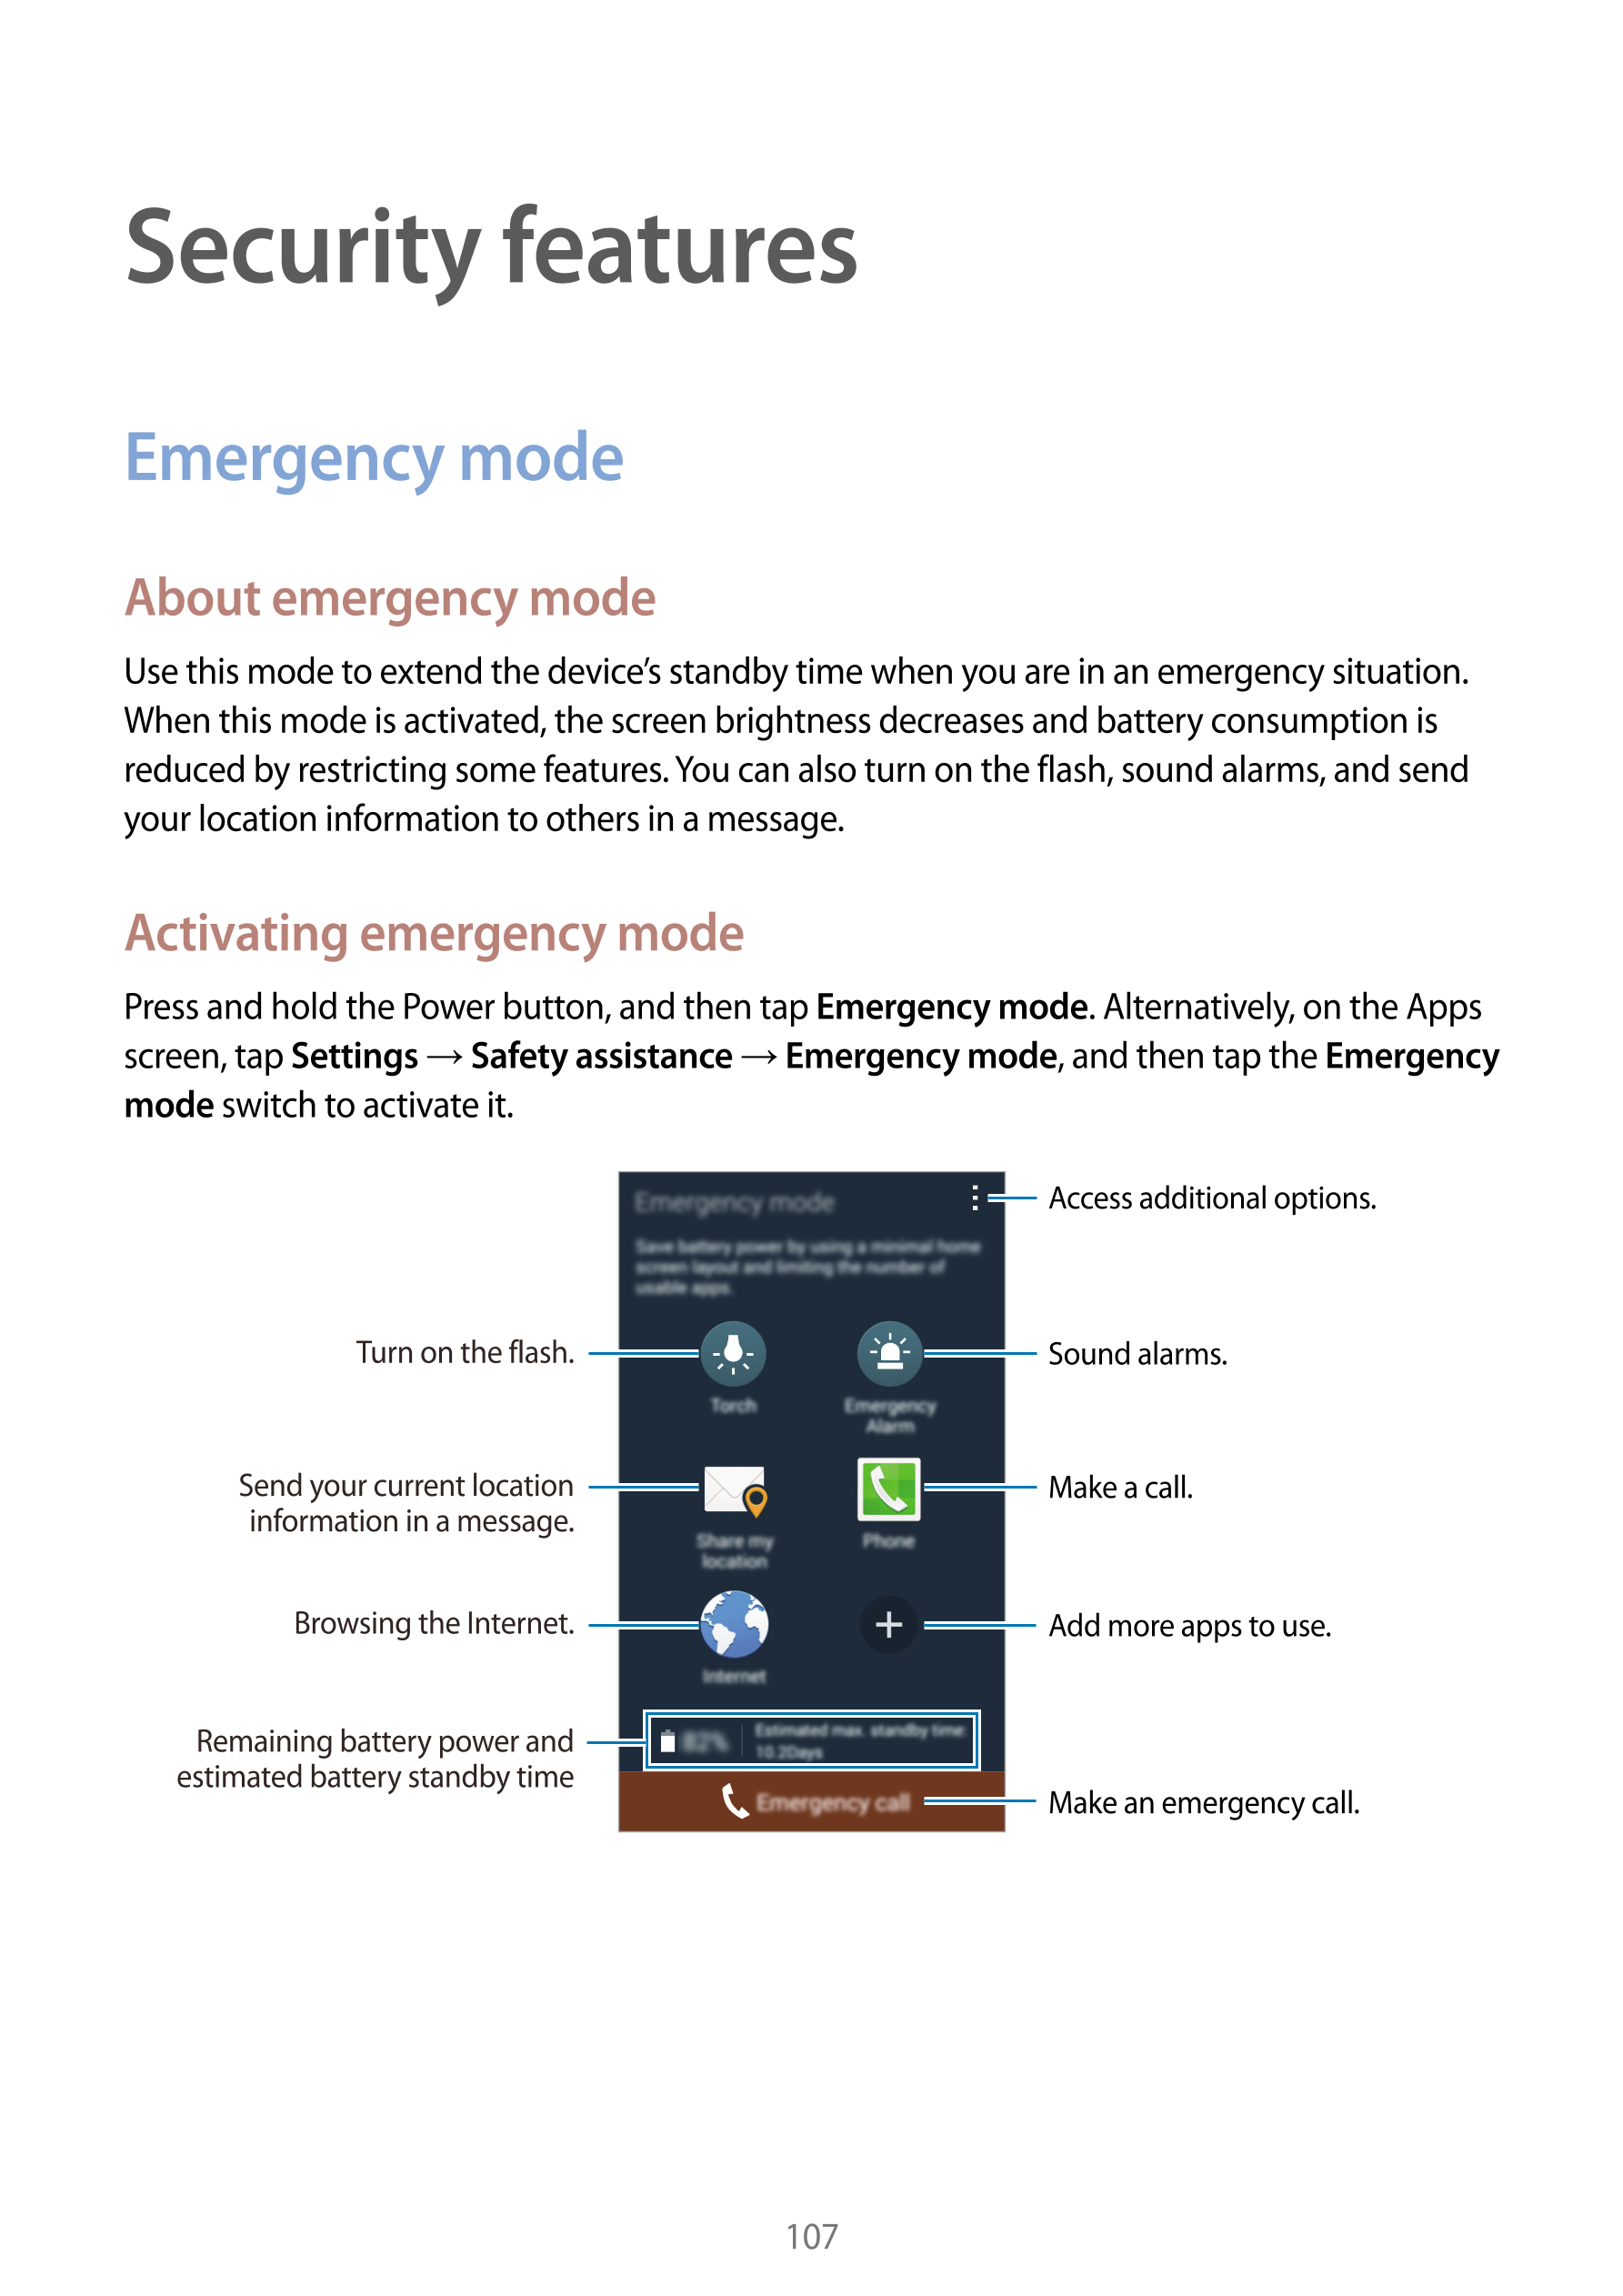 Security features
Emergency mode
About emergency mode
Use this mode to extend the device’s standby time when you are in an emerg